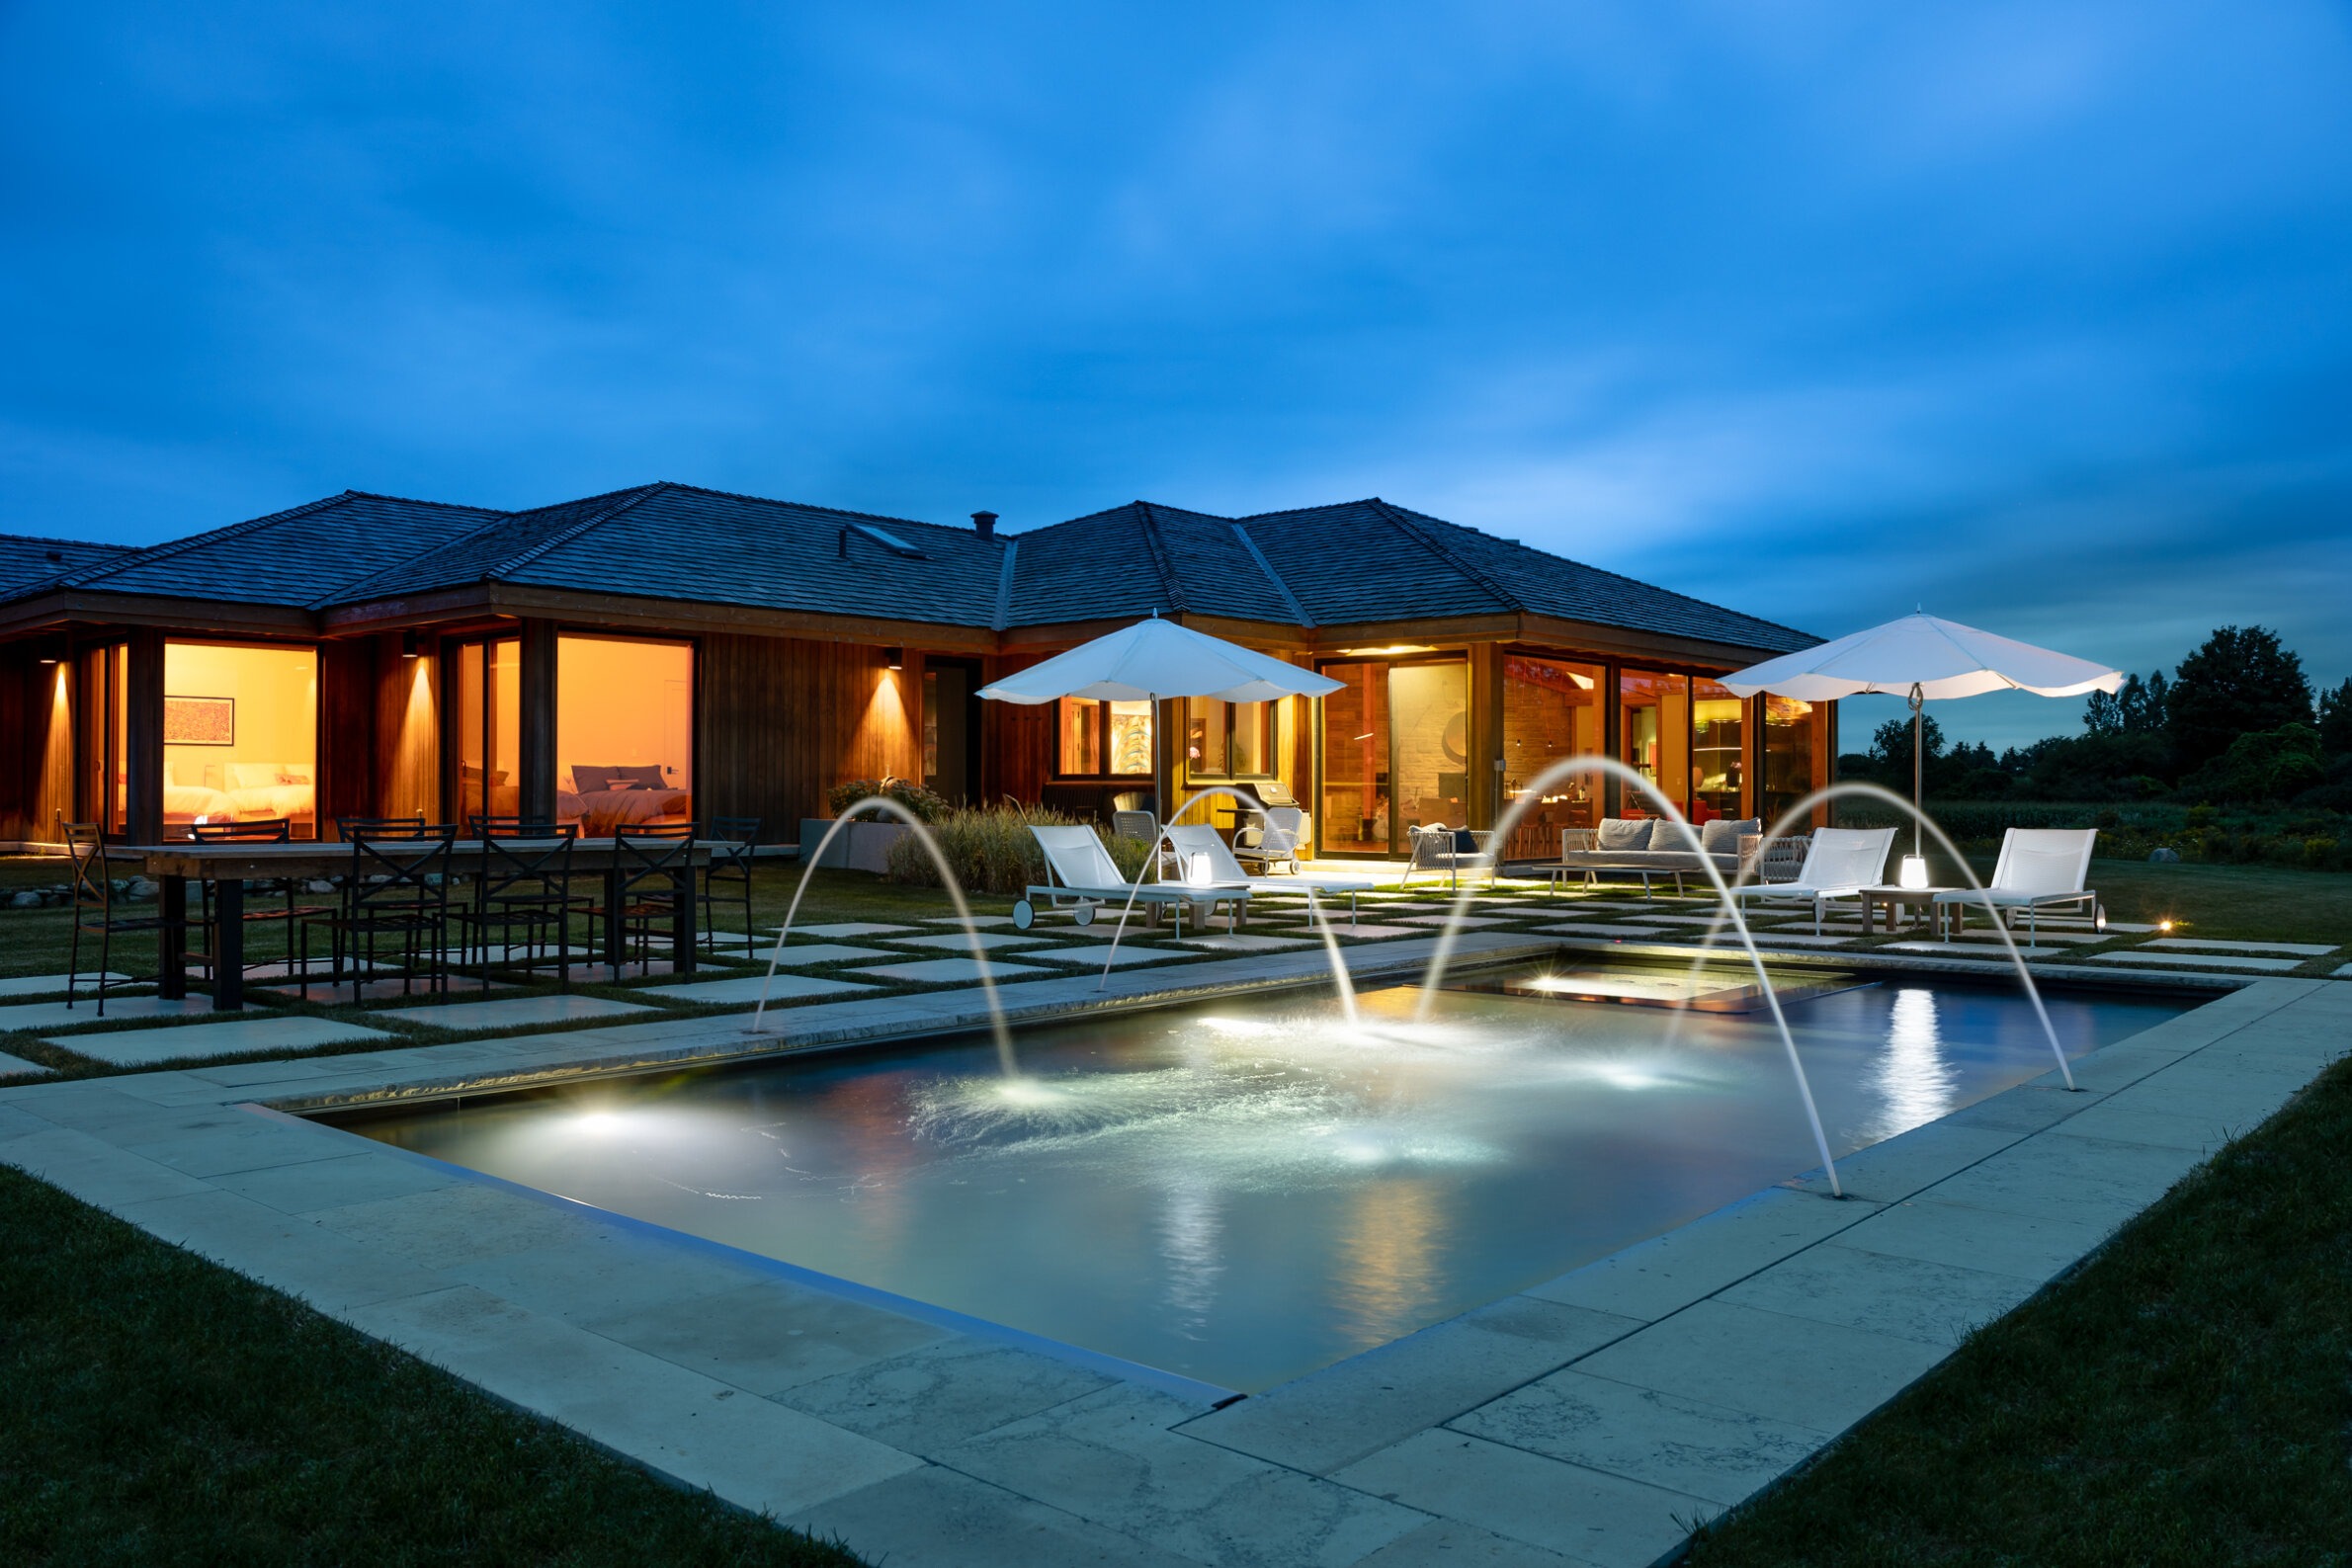 A modern house with illuminated interiors, a swimming pool with fountain jets, lounge chairs, and outdoor lighting during twilight. Tranquil and luxurious setting.